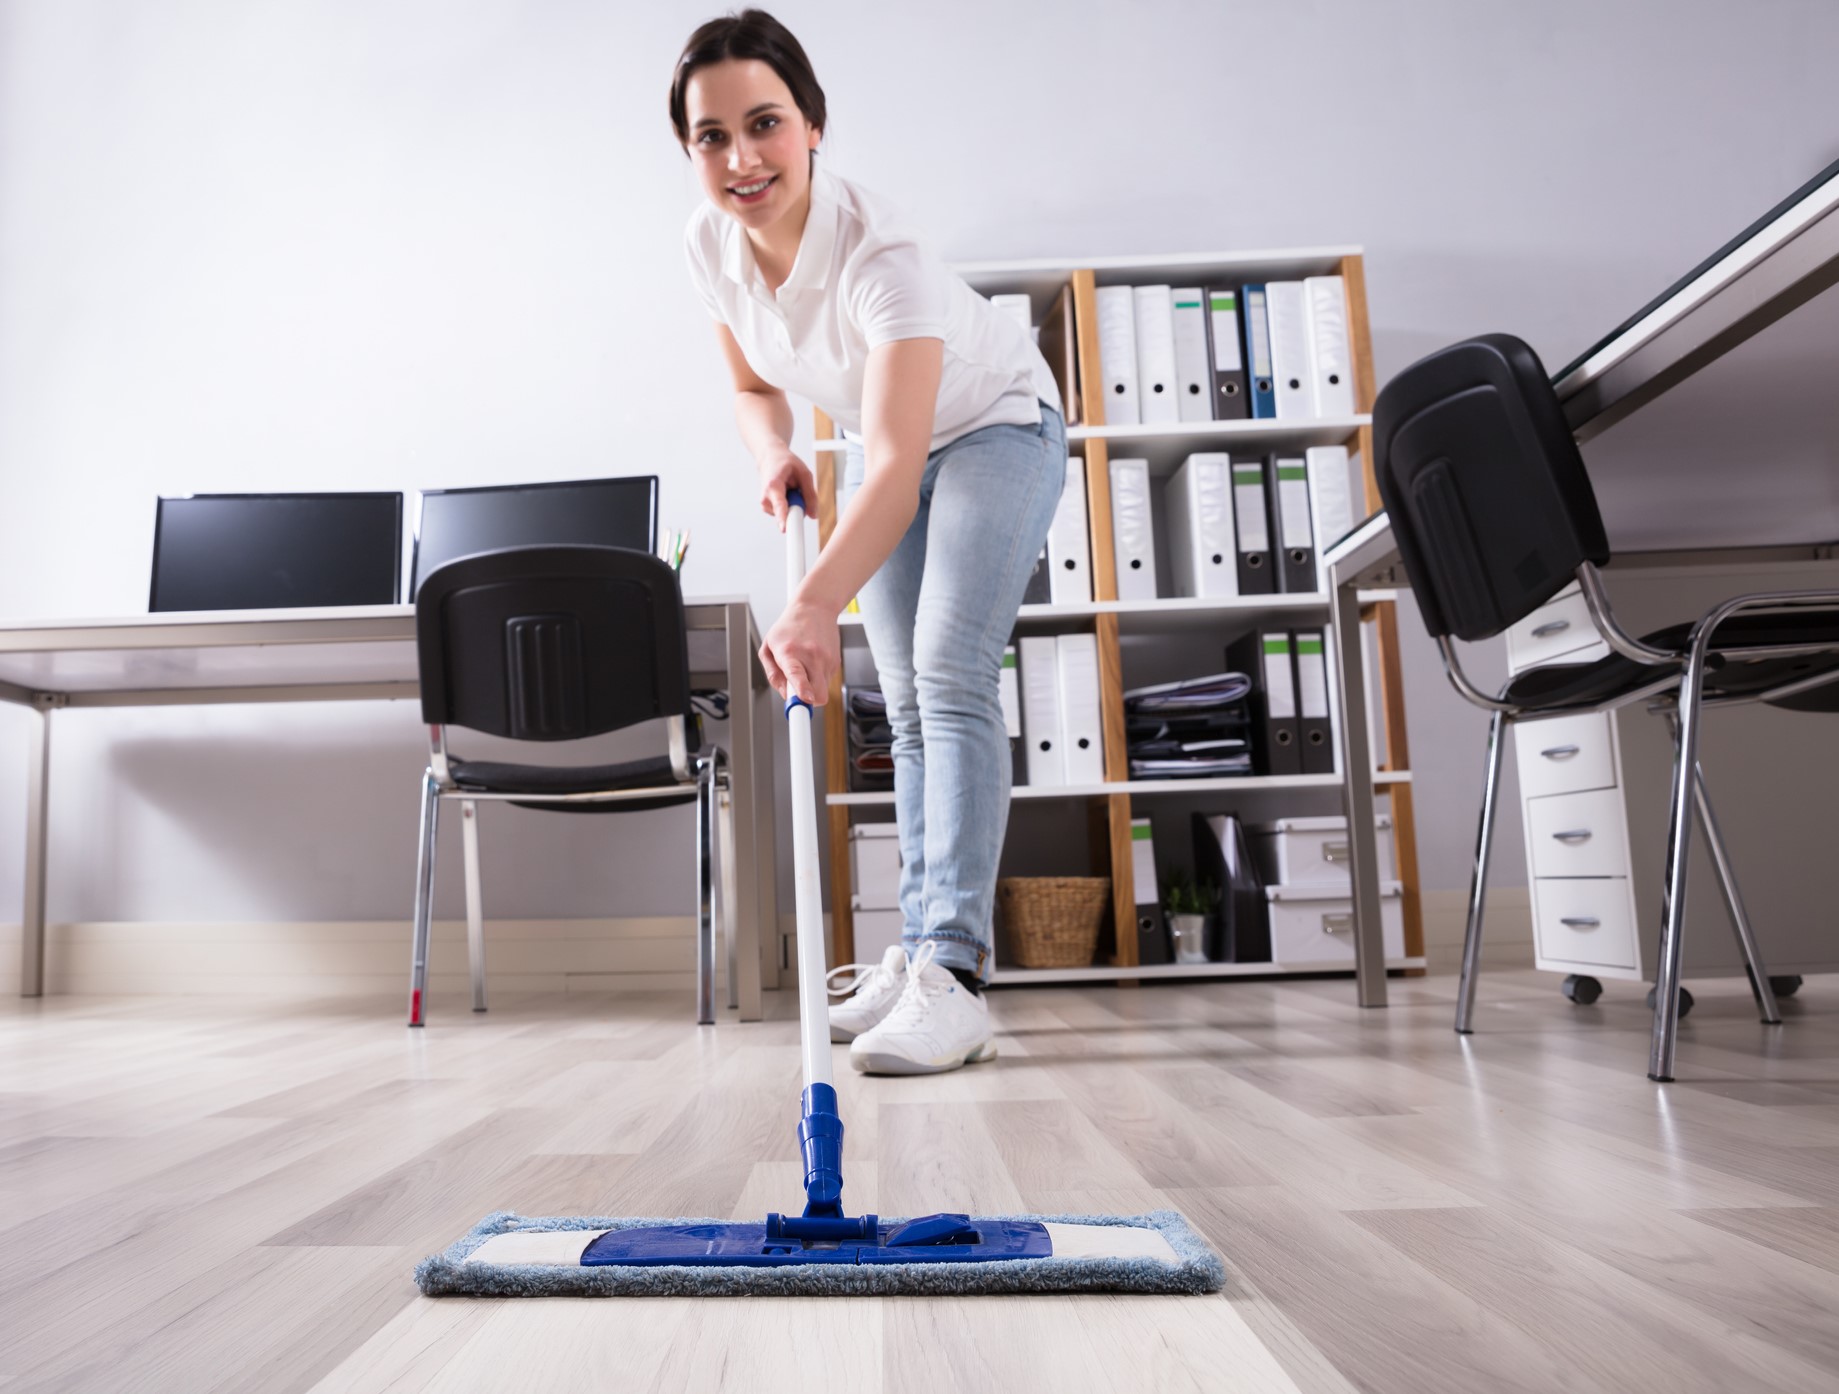 Cleaning In The Biggest Organization And Companies By Professional Carpet Cleaning In Orlando